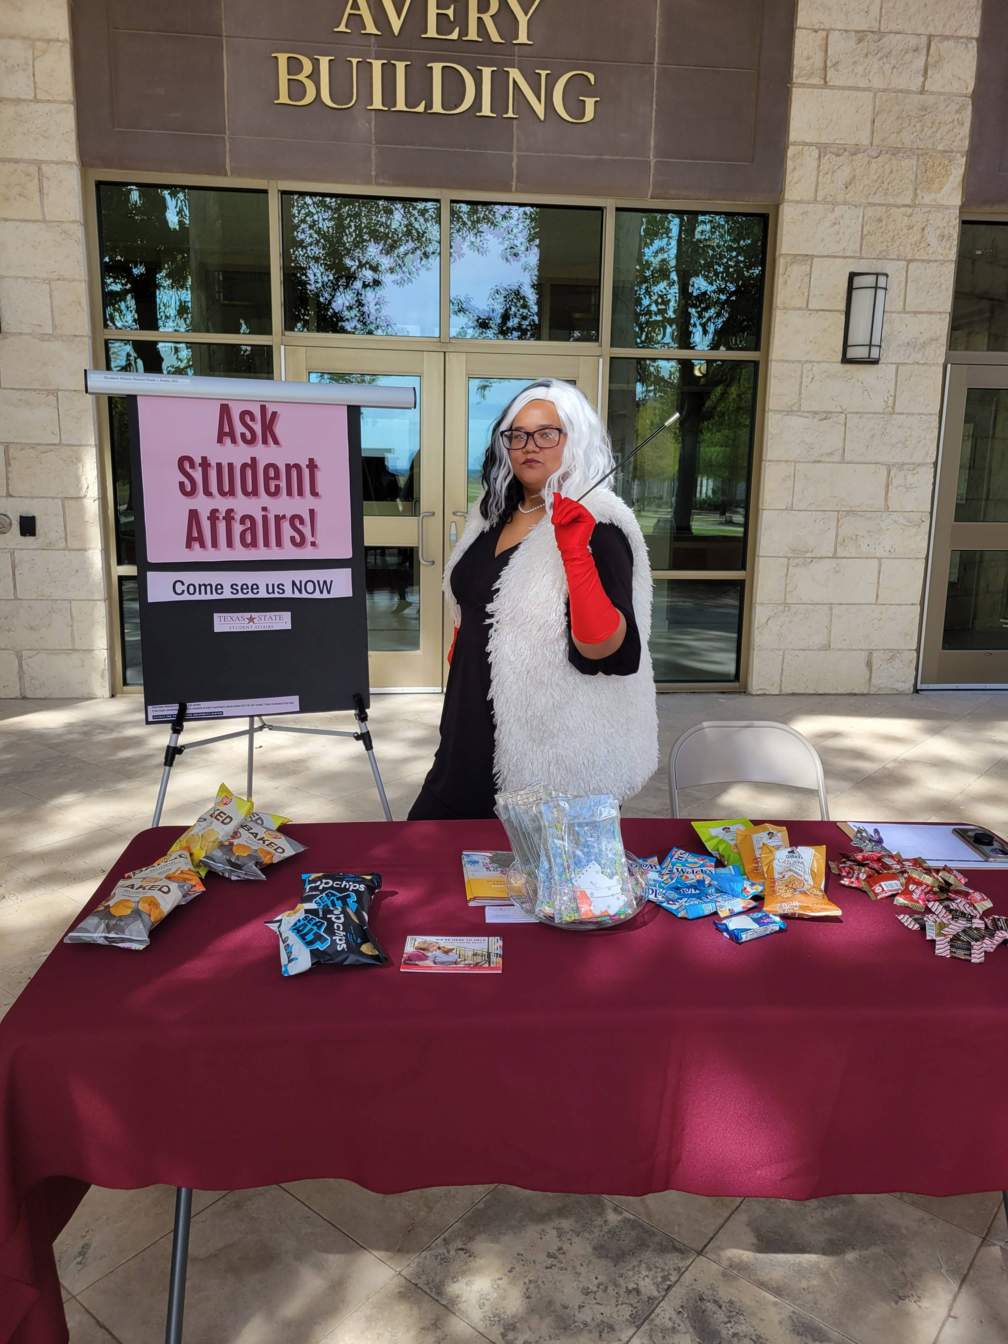 Ask Student Affairs Information Table in front of Avery Building entrance